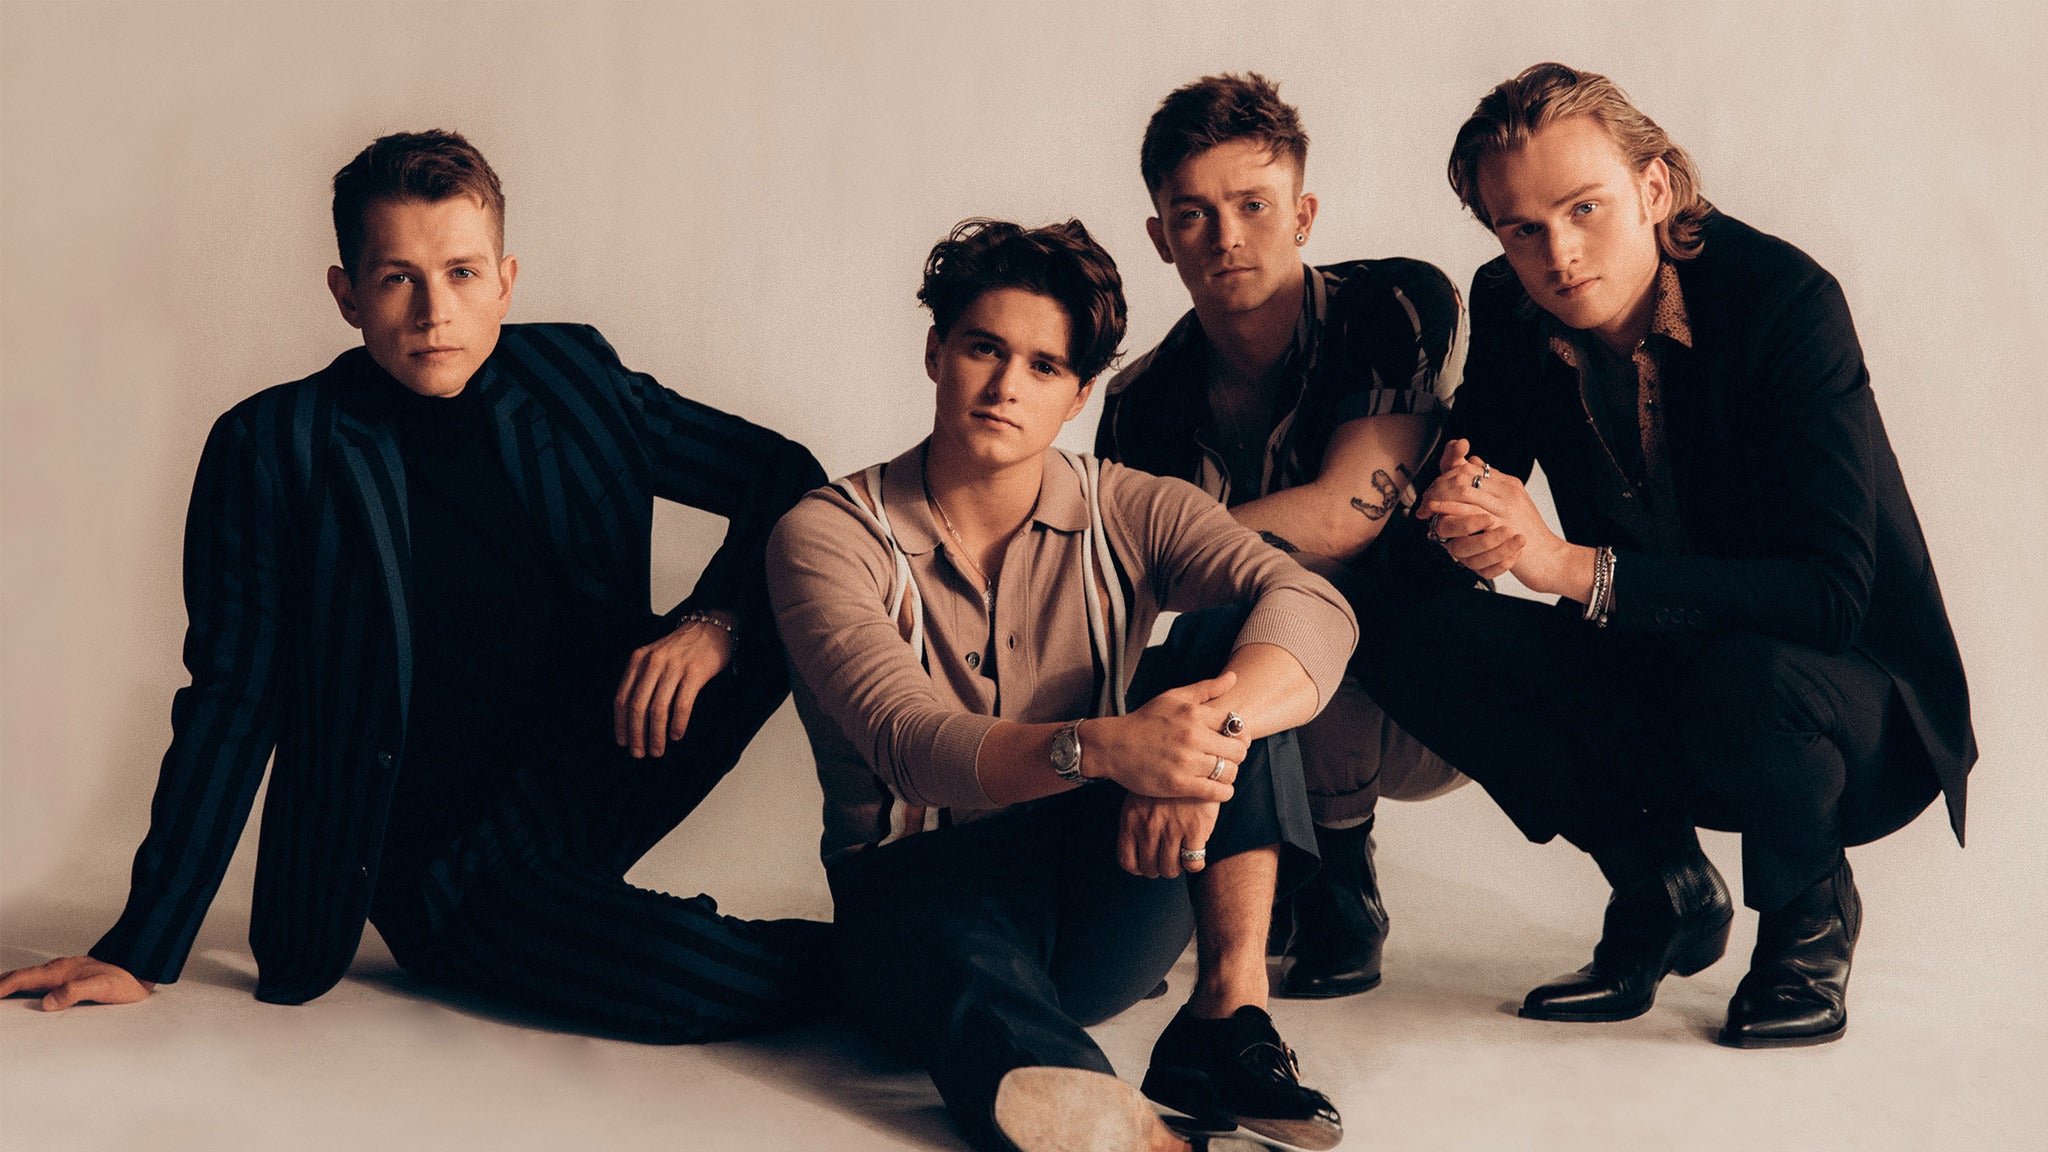 The Vamps - Greatest Hits Tour